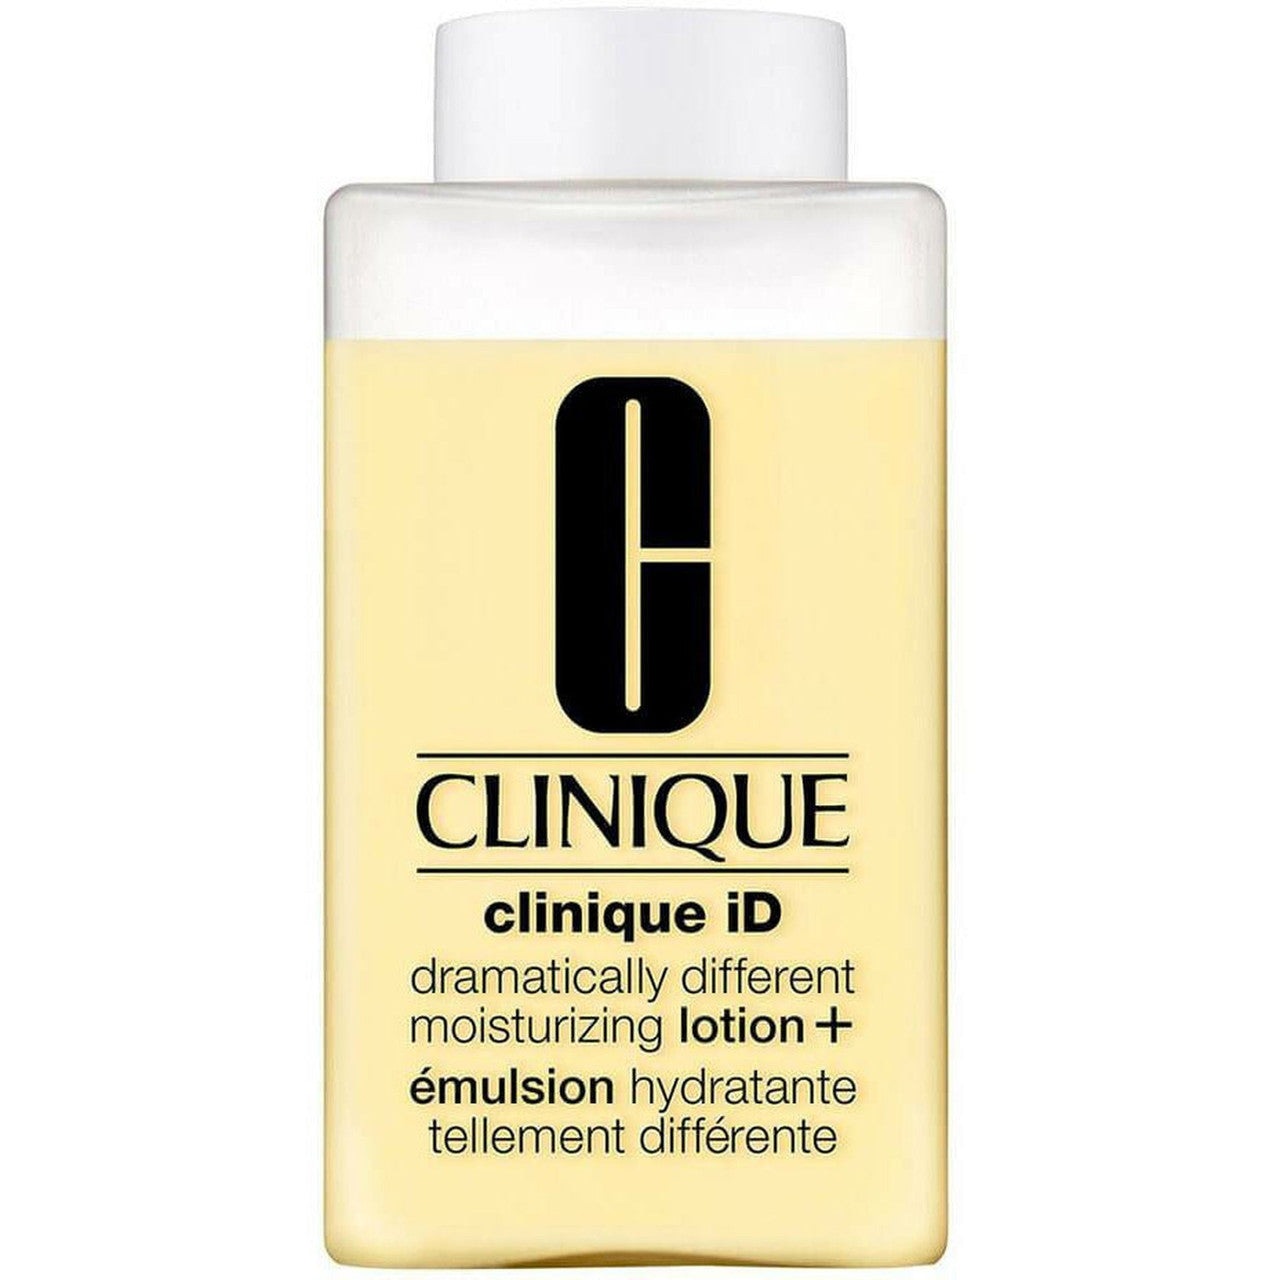 Clinique Clinique iD Dramatically Different Moisturizing Lotion + 115ml - For Dry & Very Dry Skin